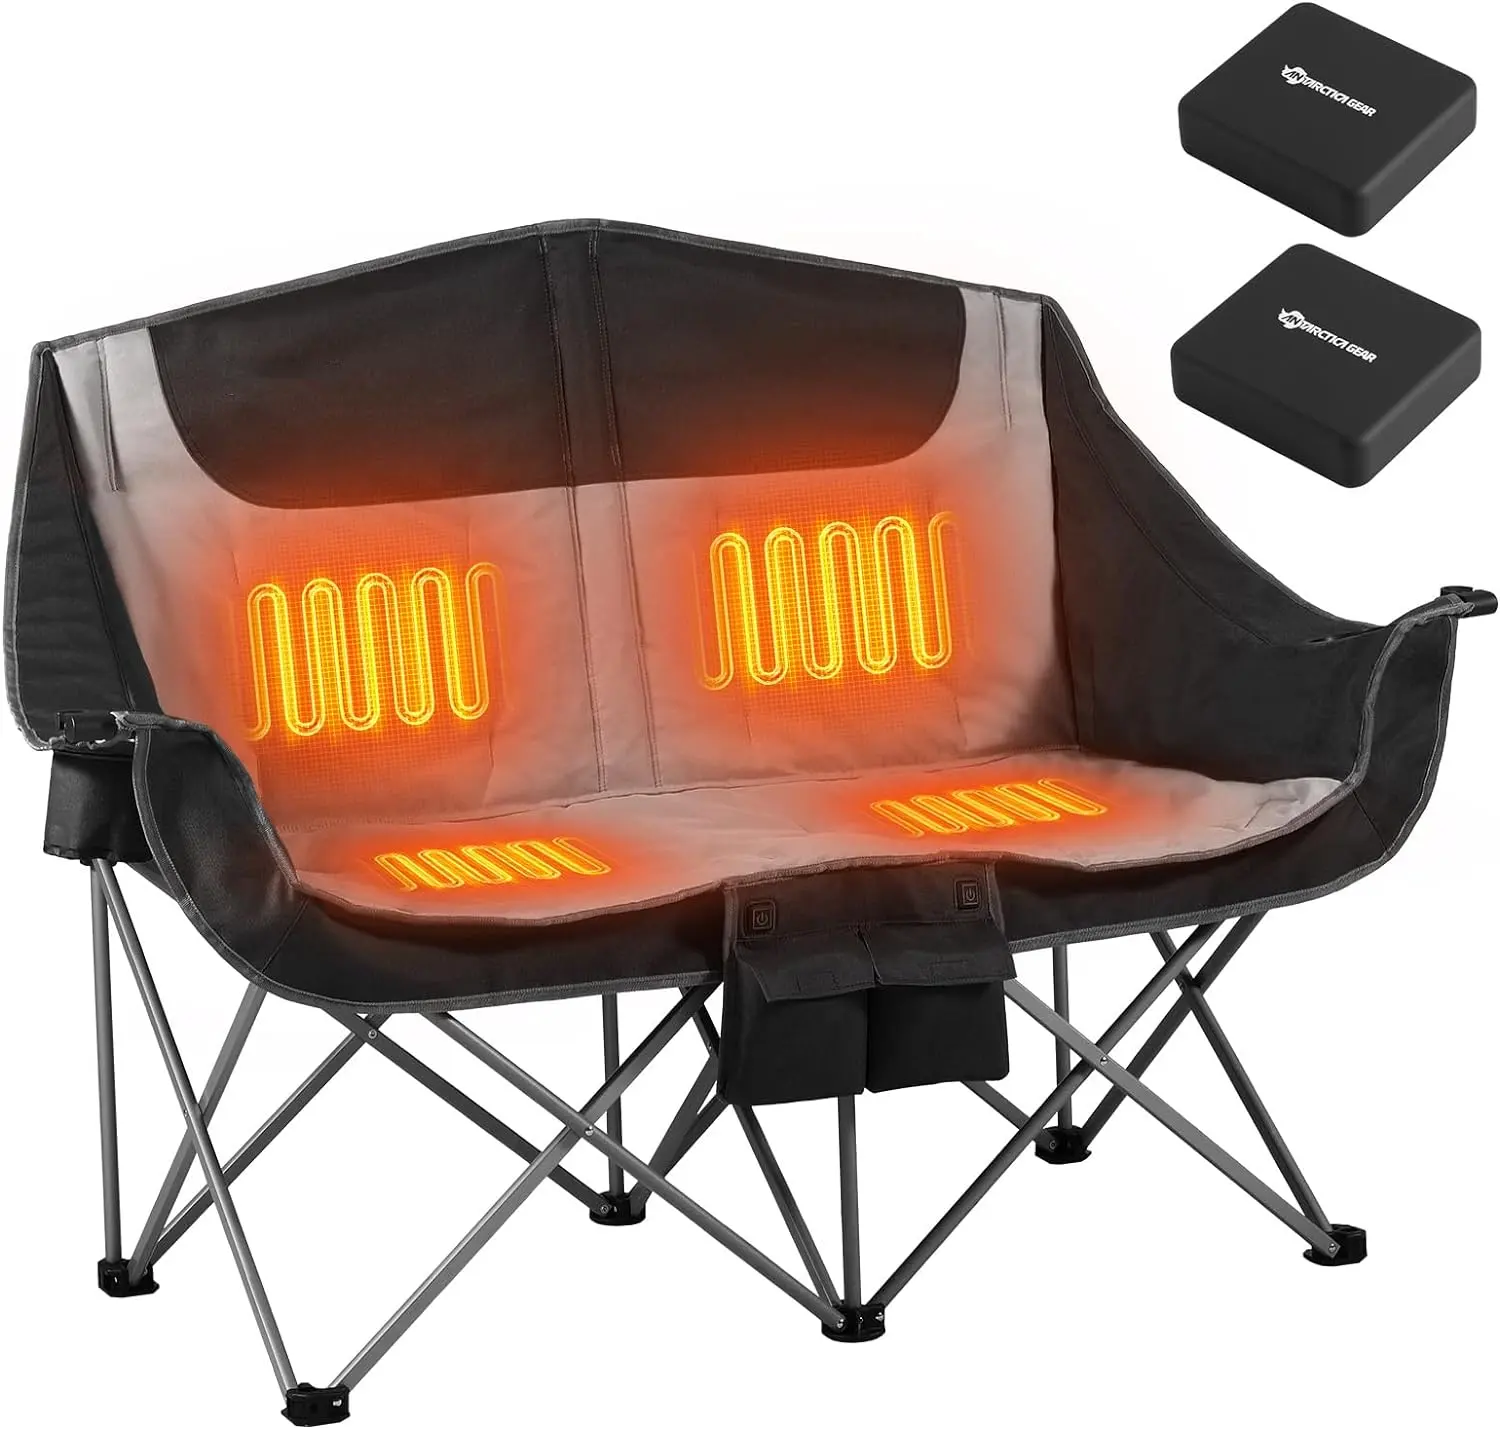 Heated Double Camping Chair, 2-Person Folding Chair with 12V 16000mAh Battery Pack, Heated Portable Loveseat Chair, for Outdoor